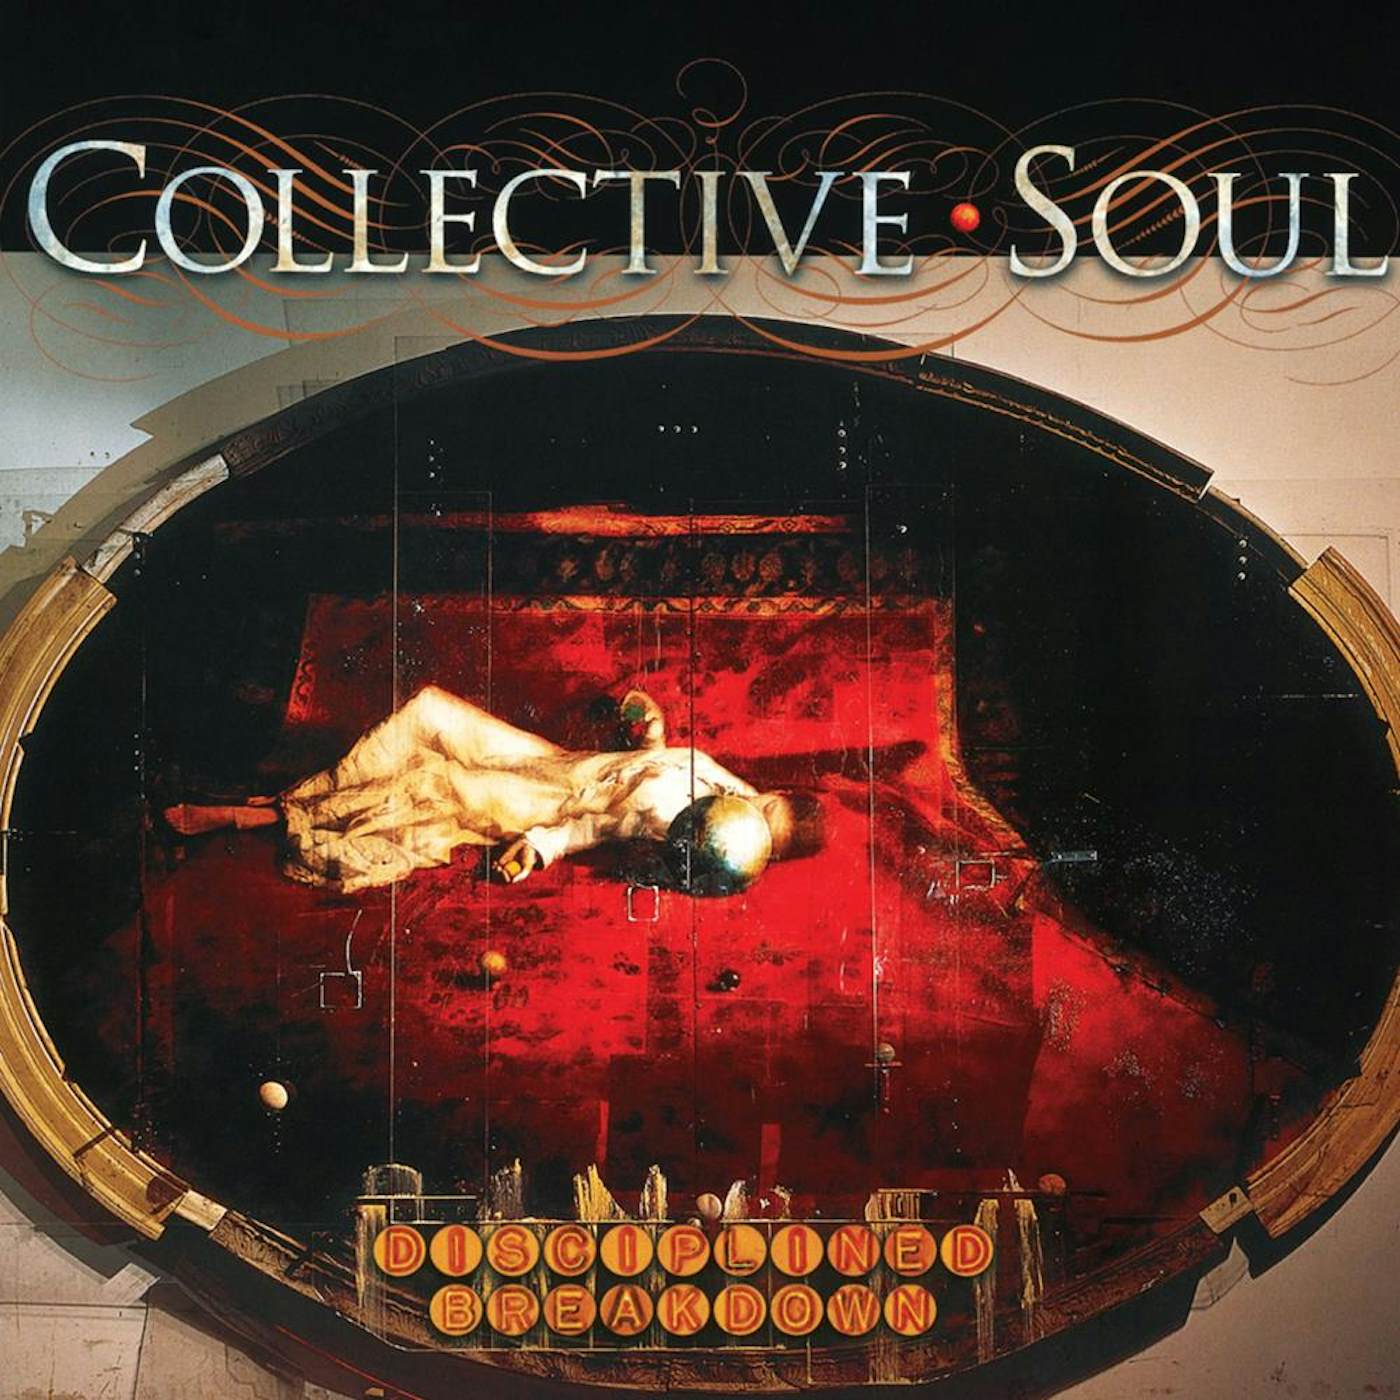 Collective Soul DISCIPLINED BREAKDOWN CD